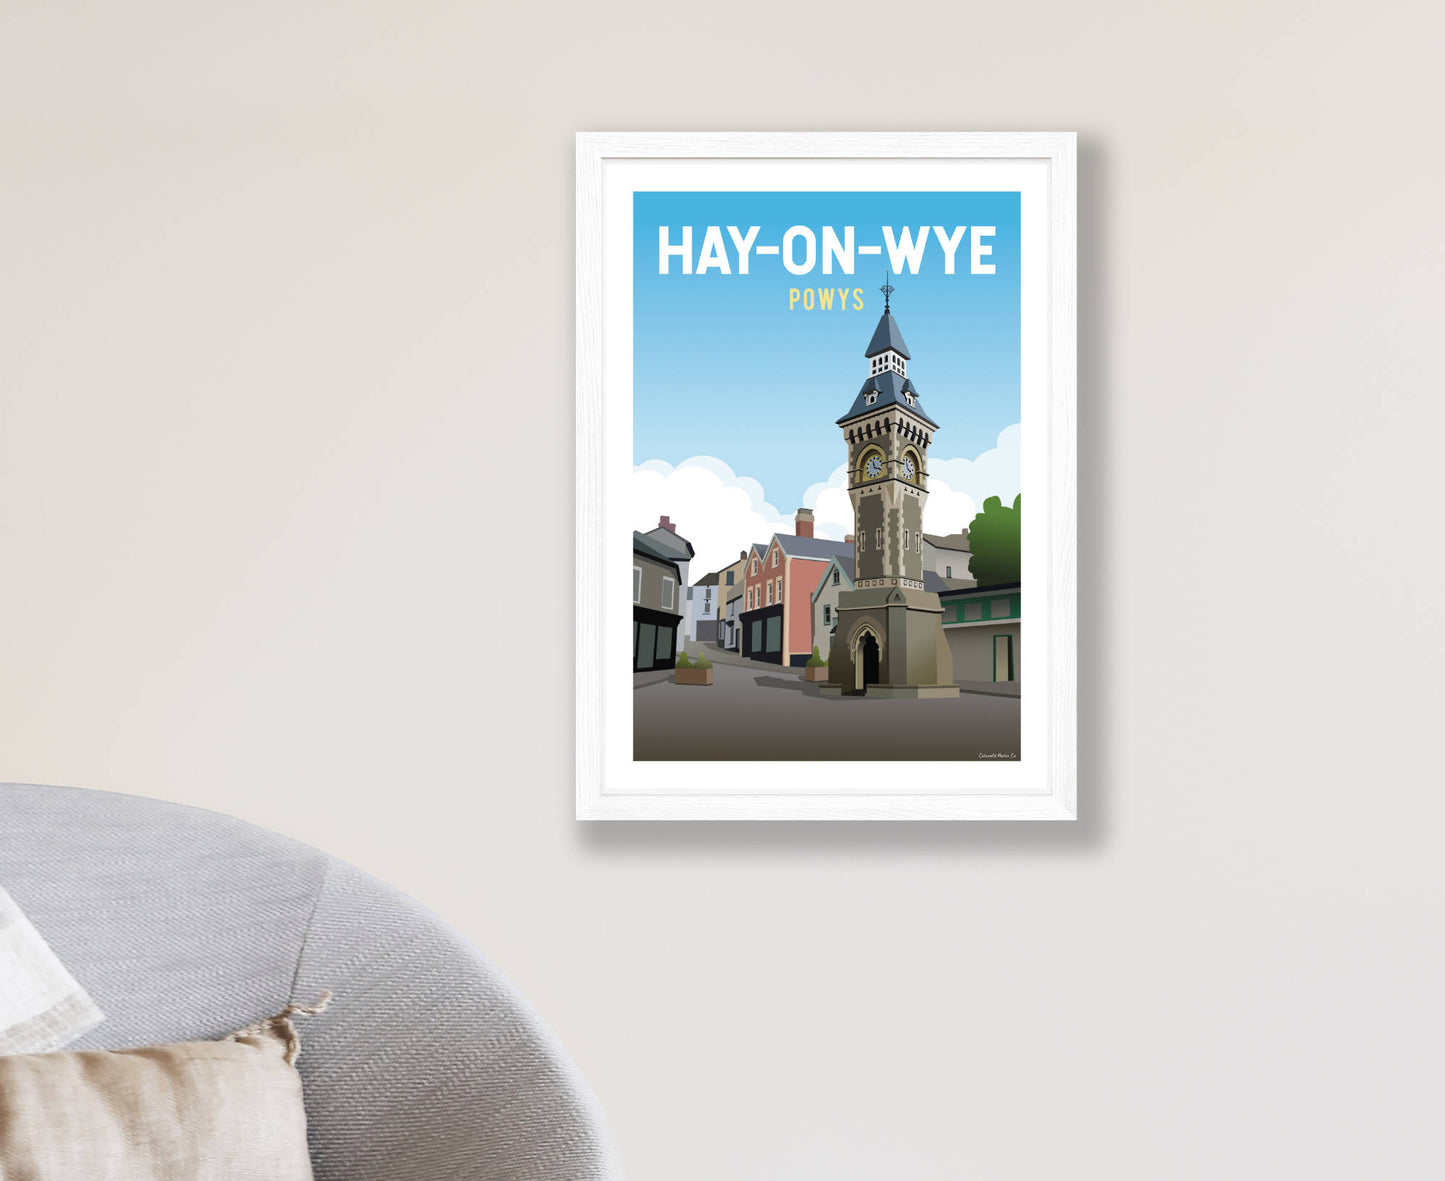 Hay-on-Wye Poster in white frame